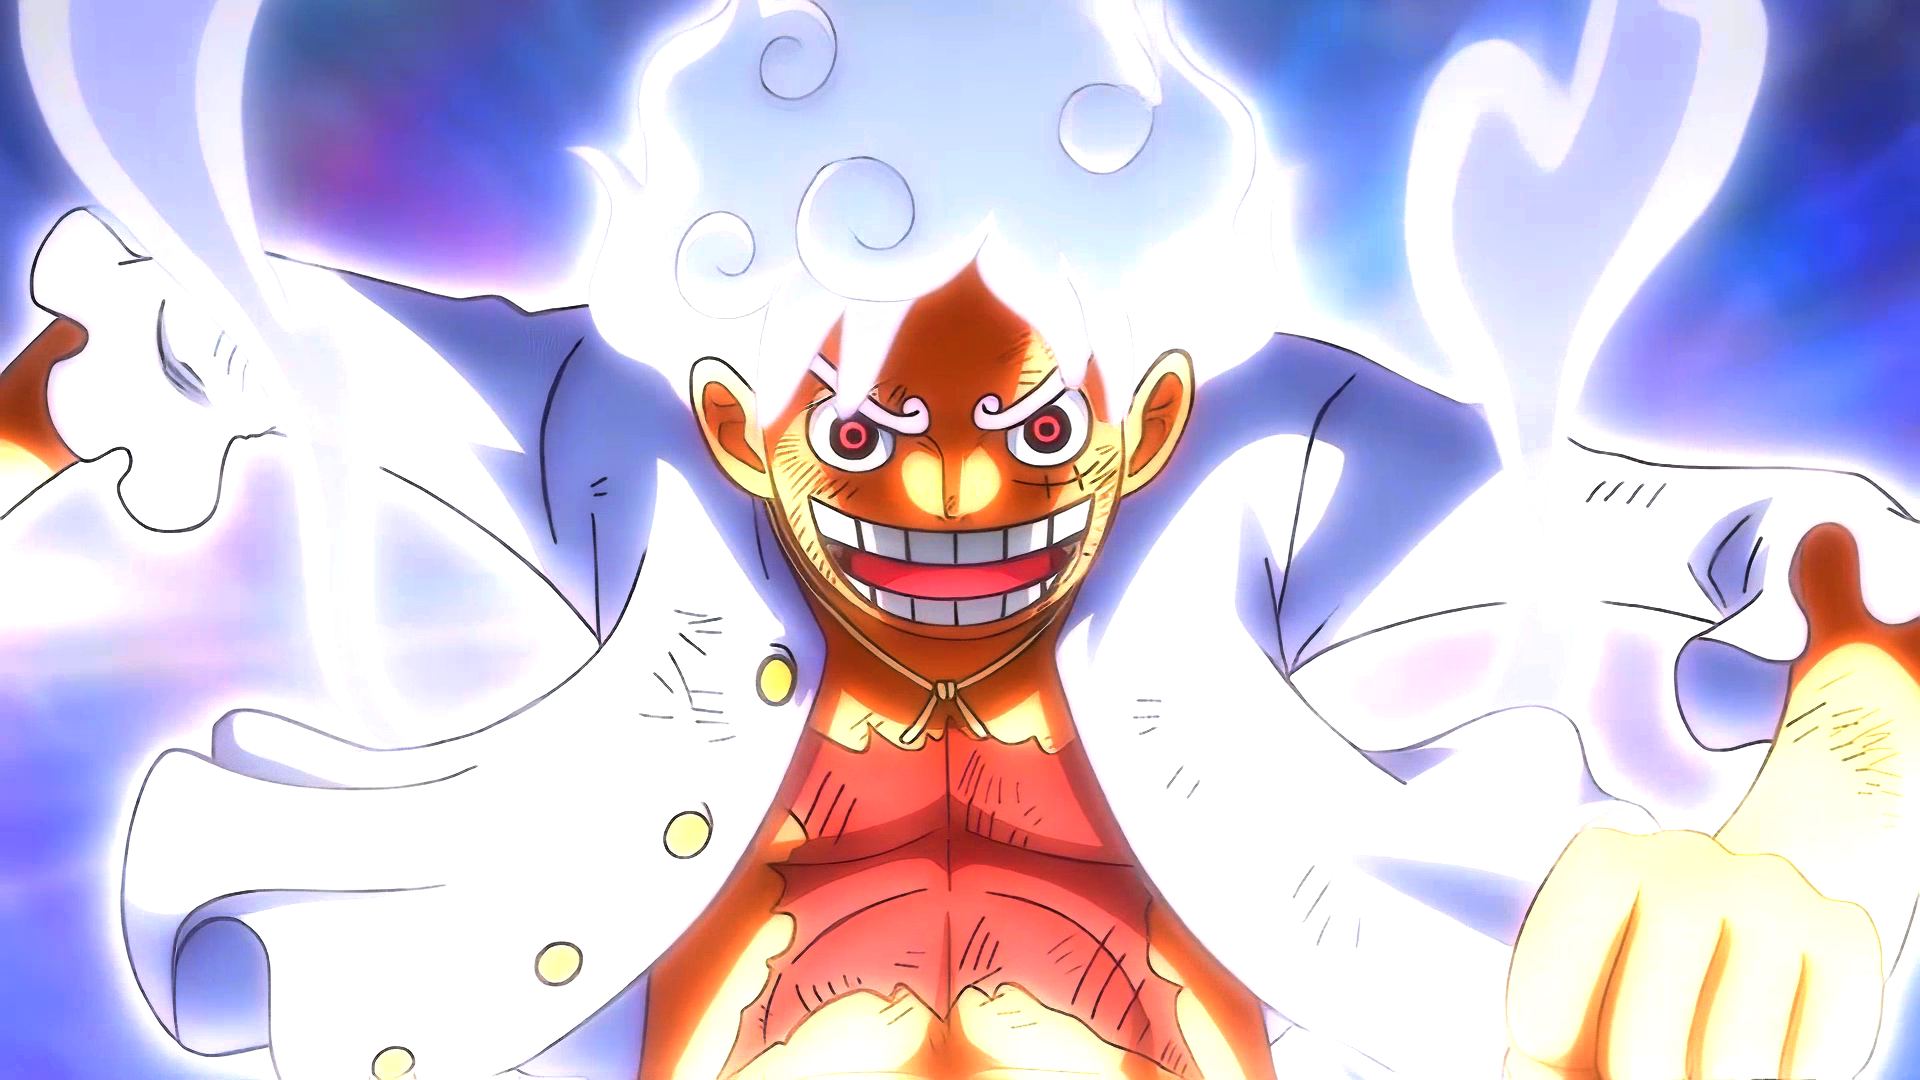 ONE PIECE.com(ワンピース) on X: Watch the teaser for the next anime episode📺  Episode 1072:The Ridiculous Power! GEAR5 in Full Play GEAR5 - Luffy and  Kaido Clash! Don't miss out! #ONEPIECE ▽Watch below